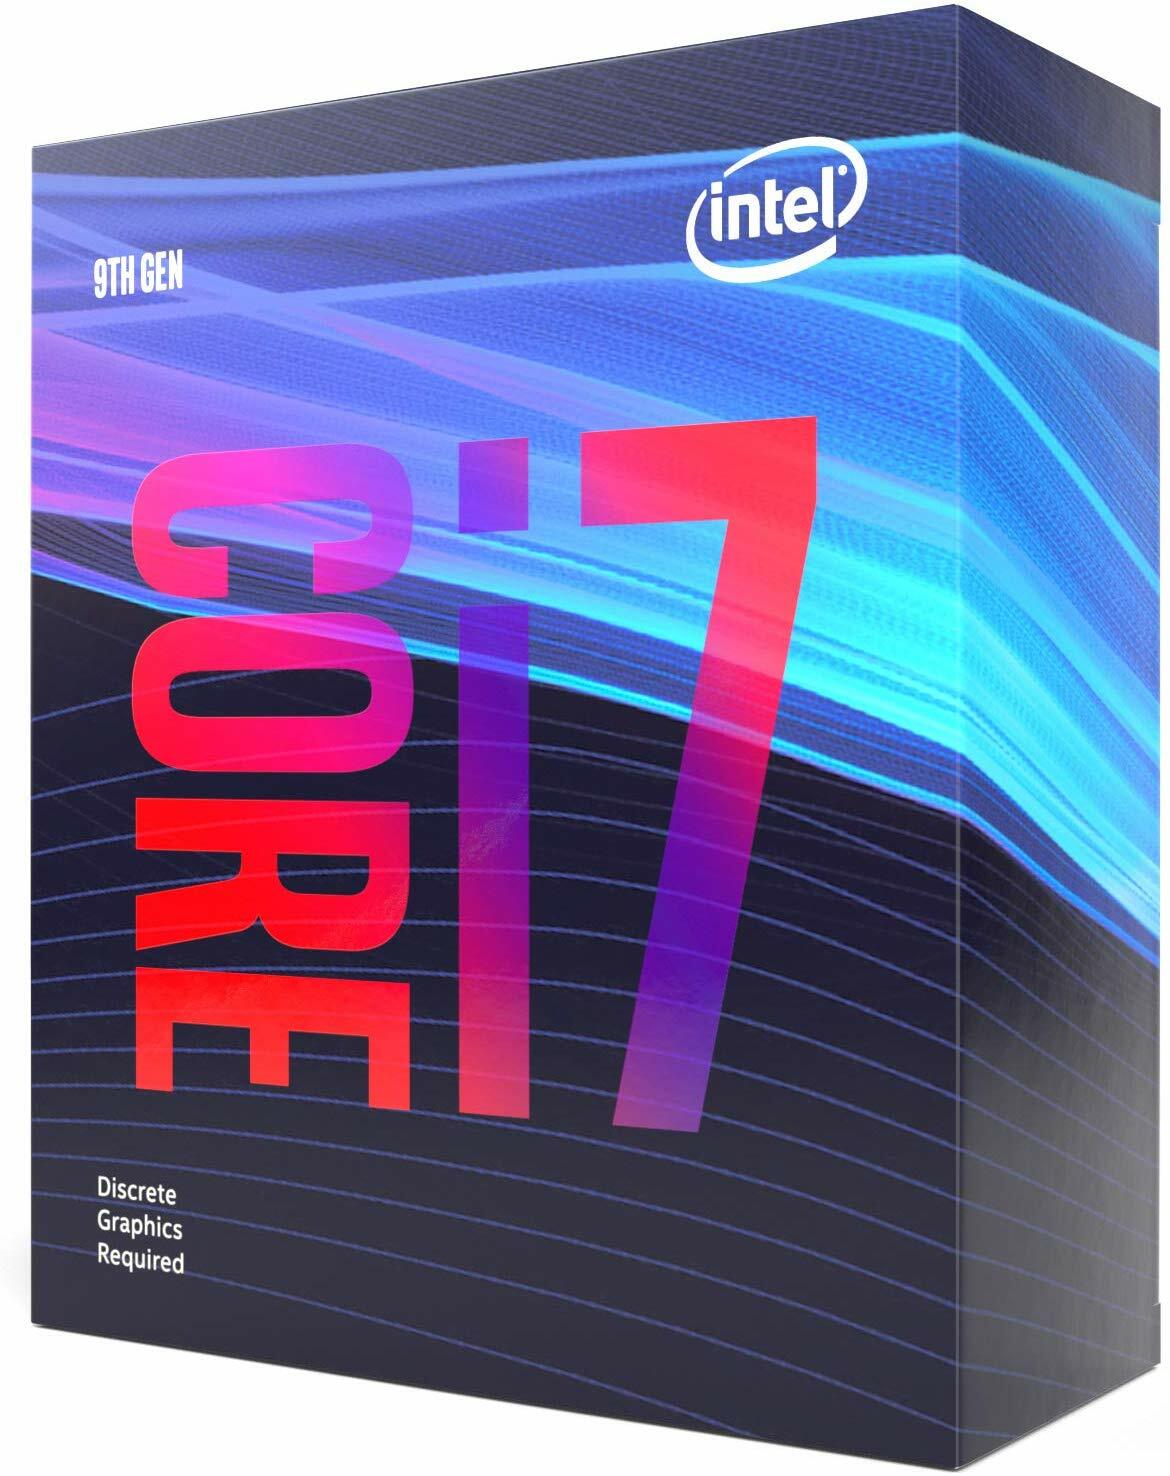 CPU Intel Core i7-9700F / 3.0-4.7GHz / S1151 / 14nm / No Integrated Graphics / 65W /